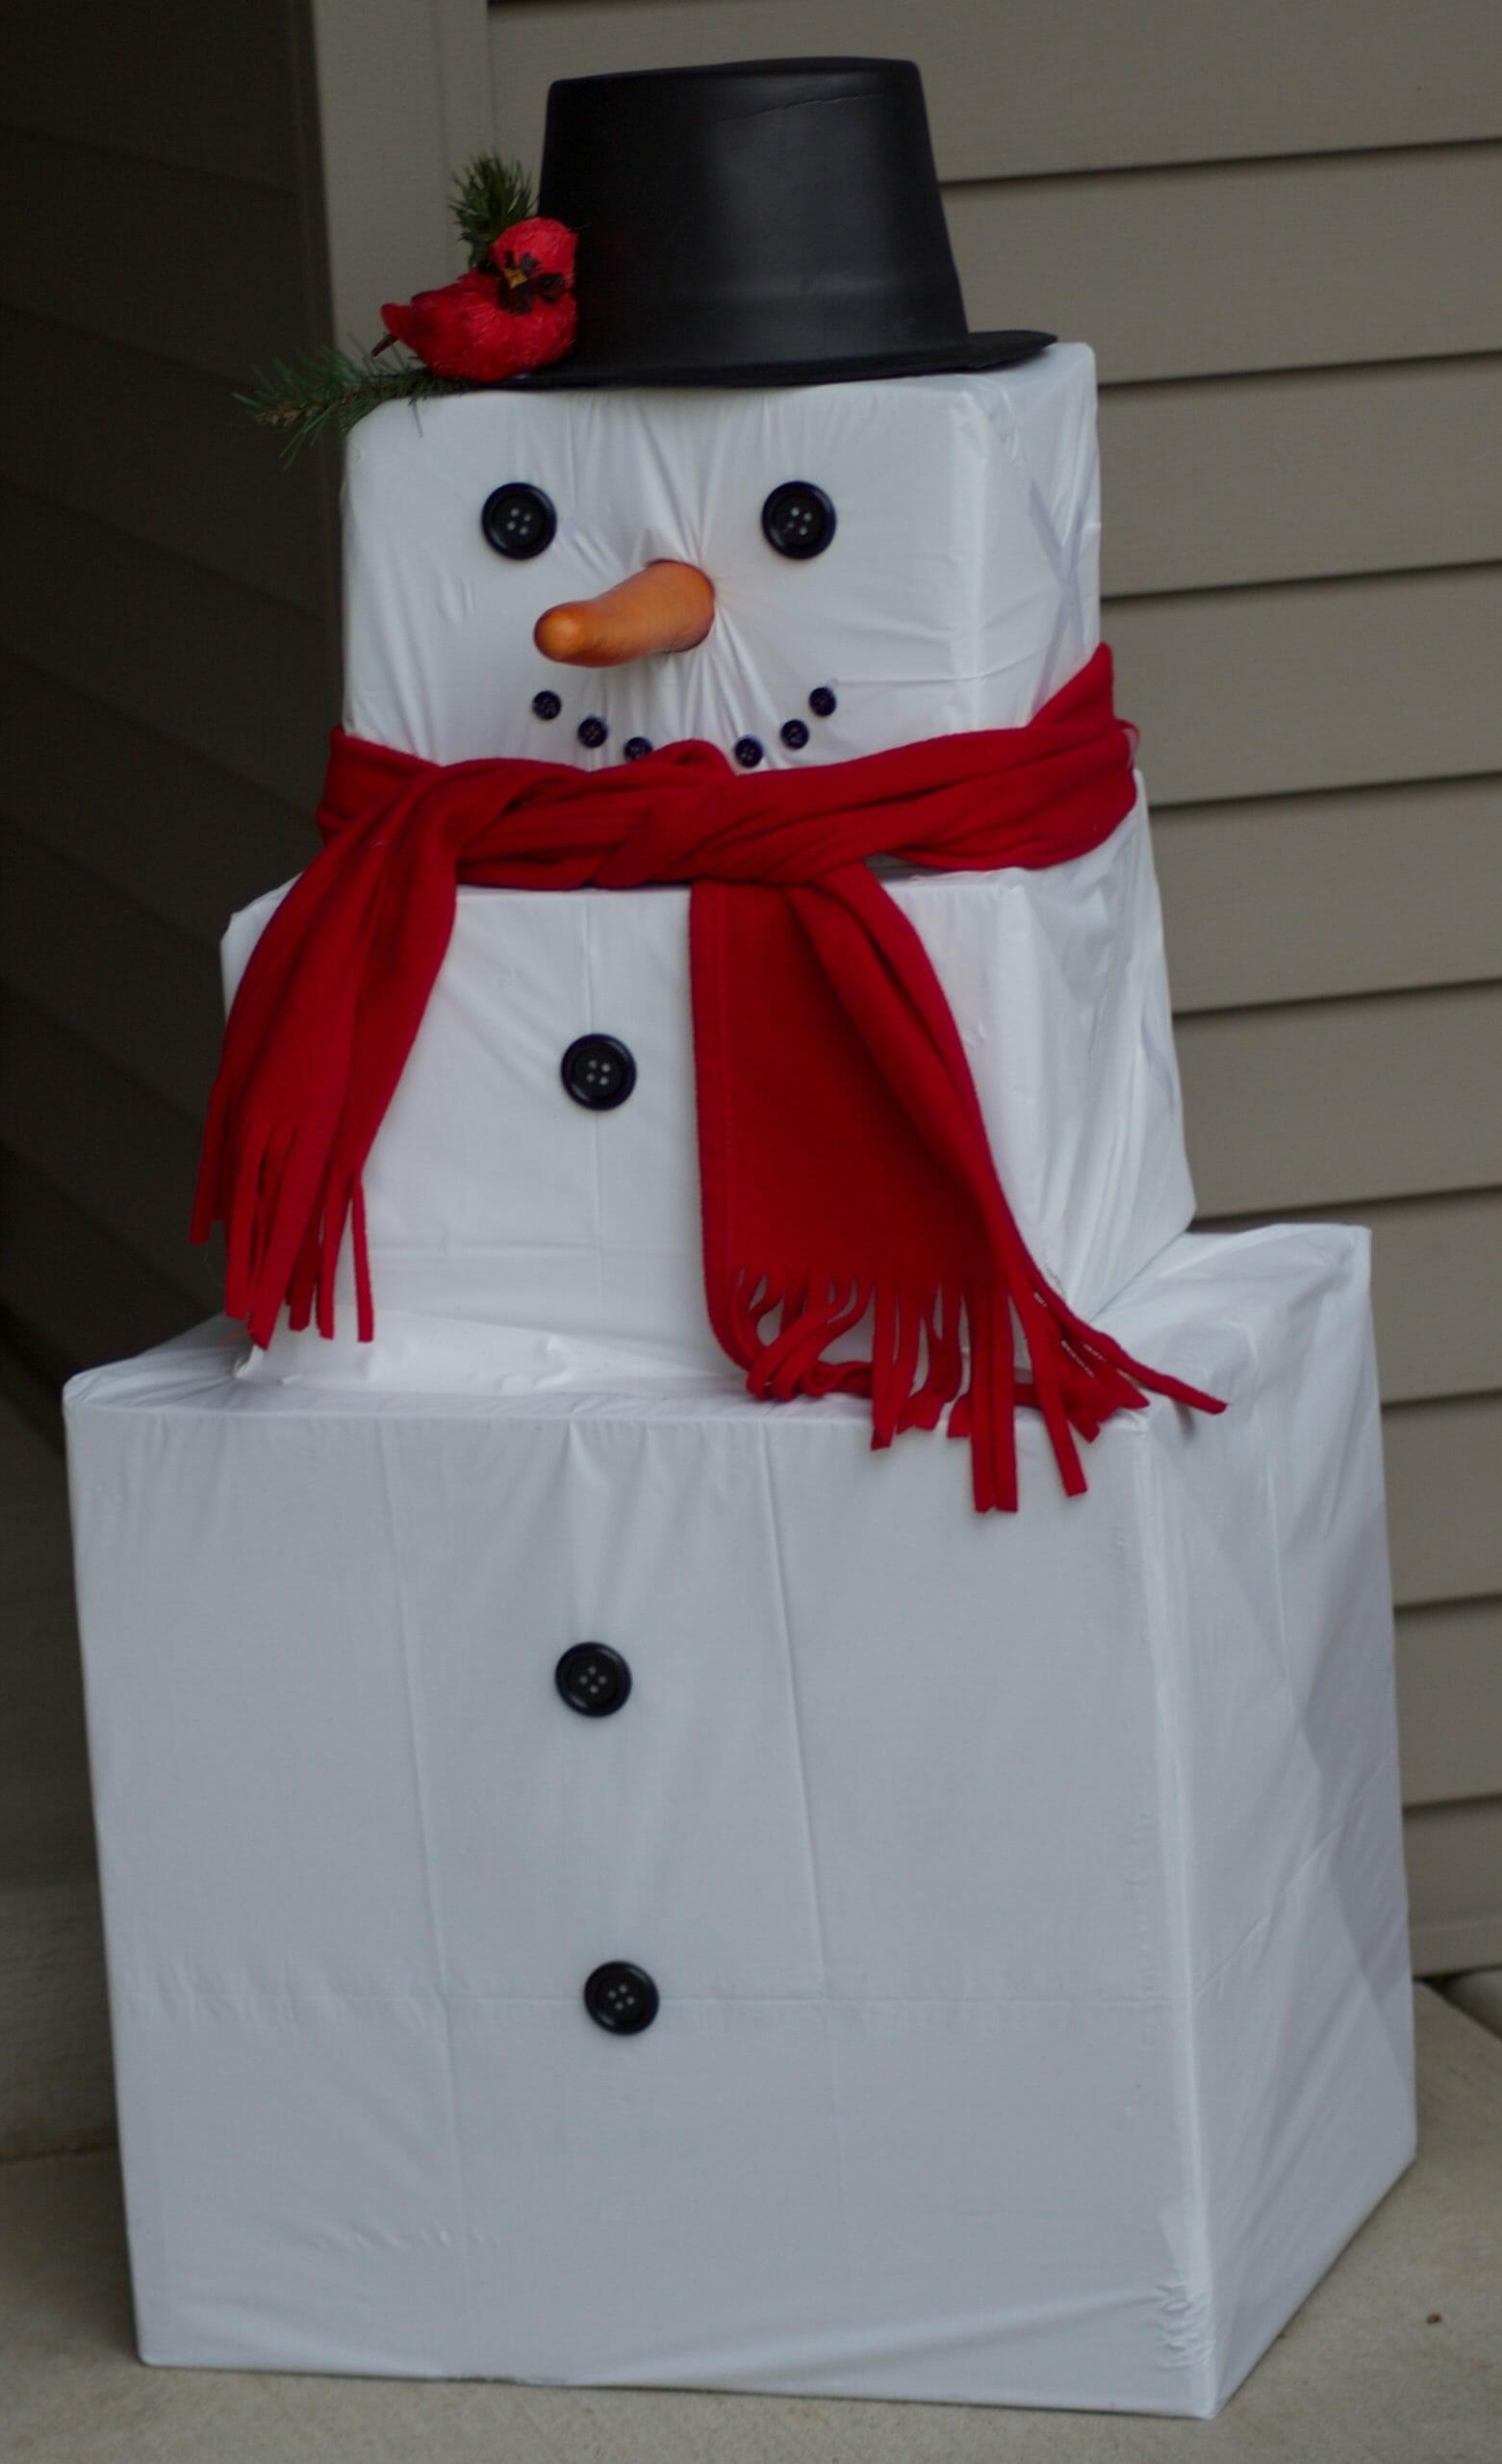 Three square boxes sitting on porch create Snowman with red scarf, carrot and cardinal sitting on hat